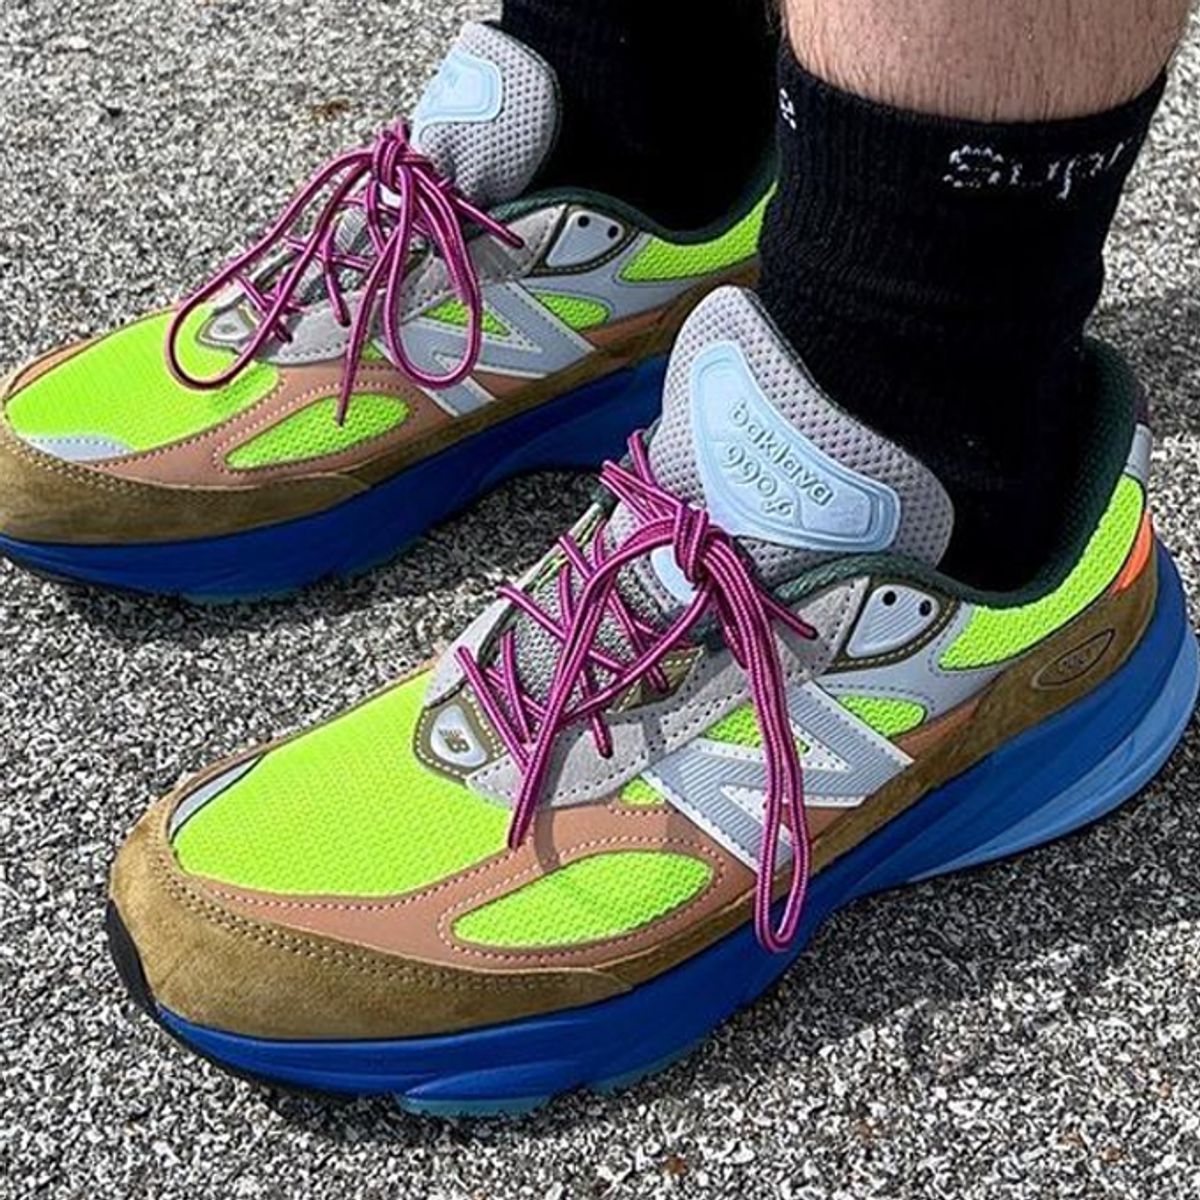 Action Bronson New Balance 990v6 Release Date